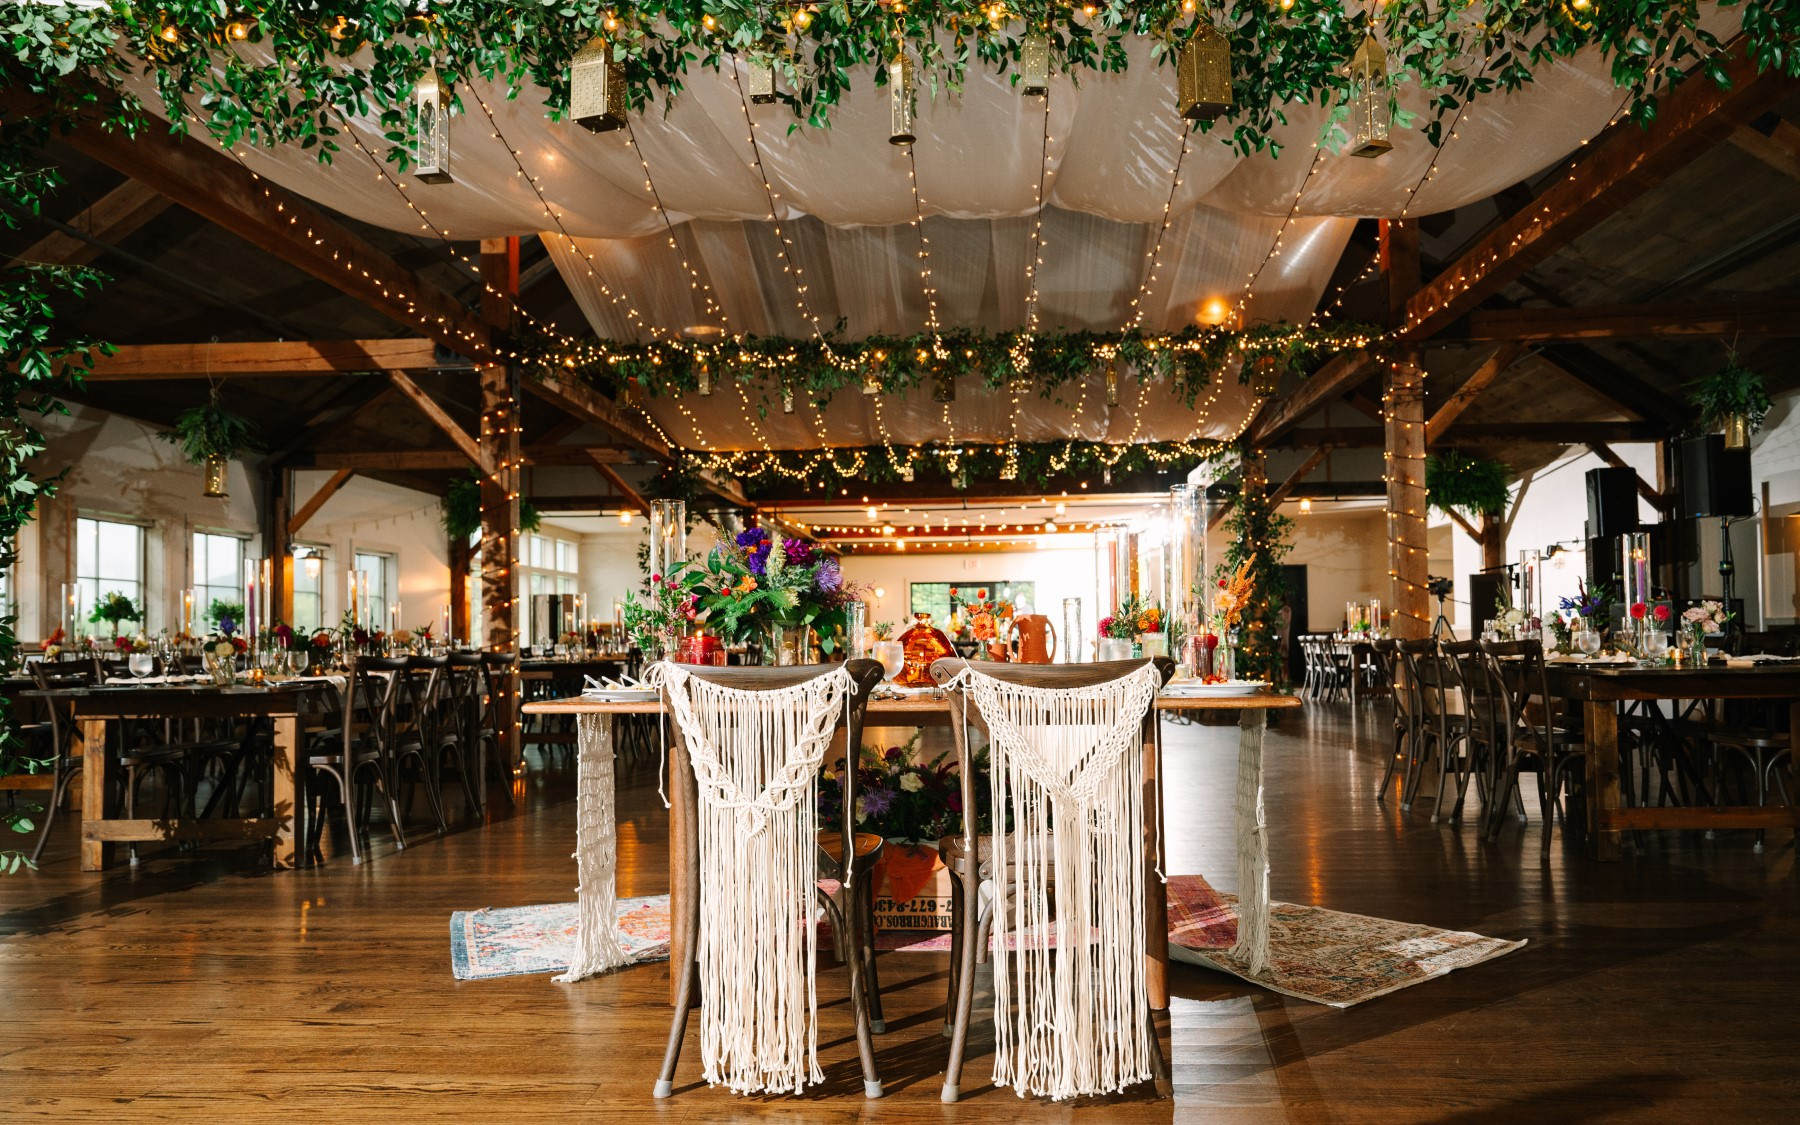 event barn decor for a boho style wedding, featuring overhead drapes, lighting, and greenery. sweetheart table is center of photograph with macrame designed backers for the chairs and floral is on the table.